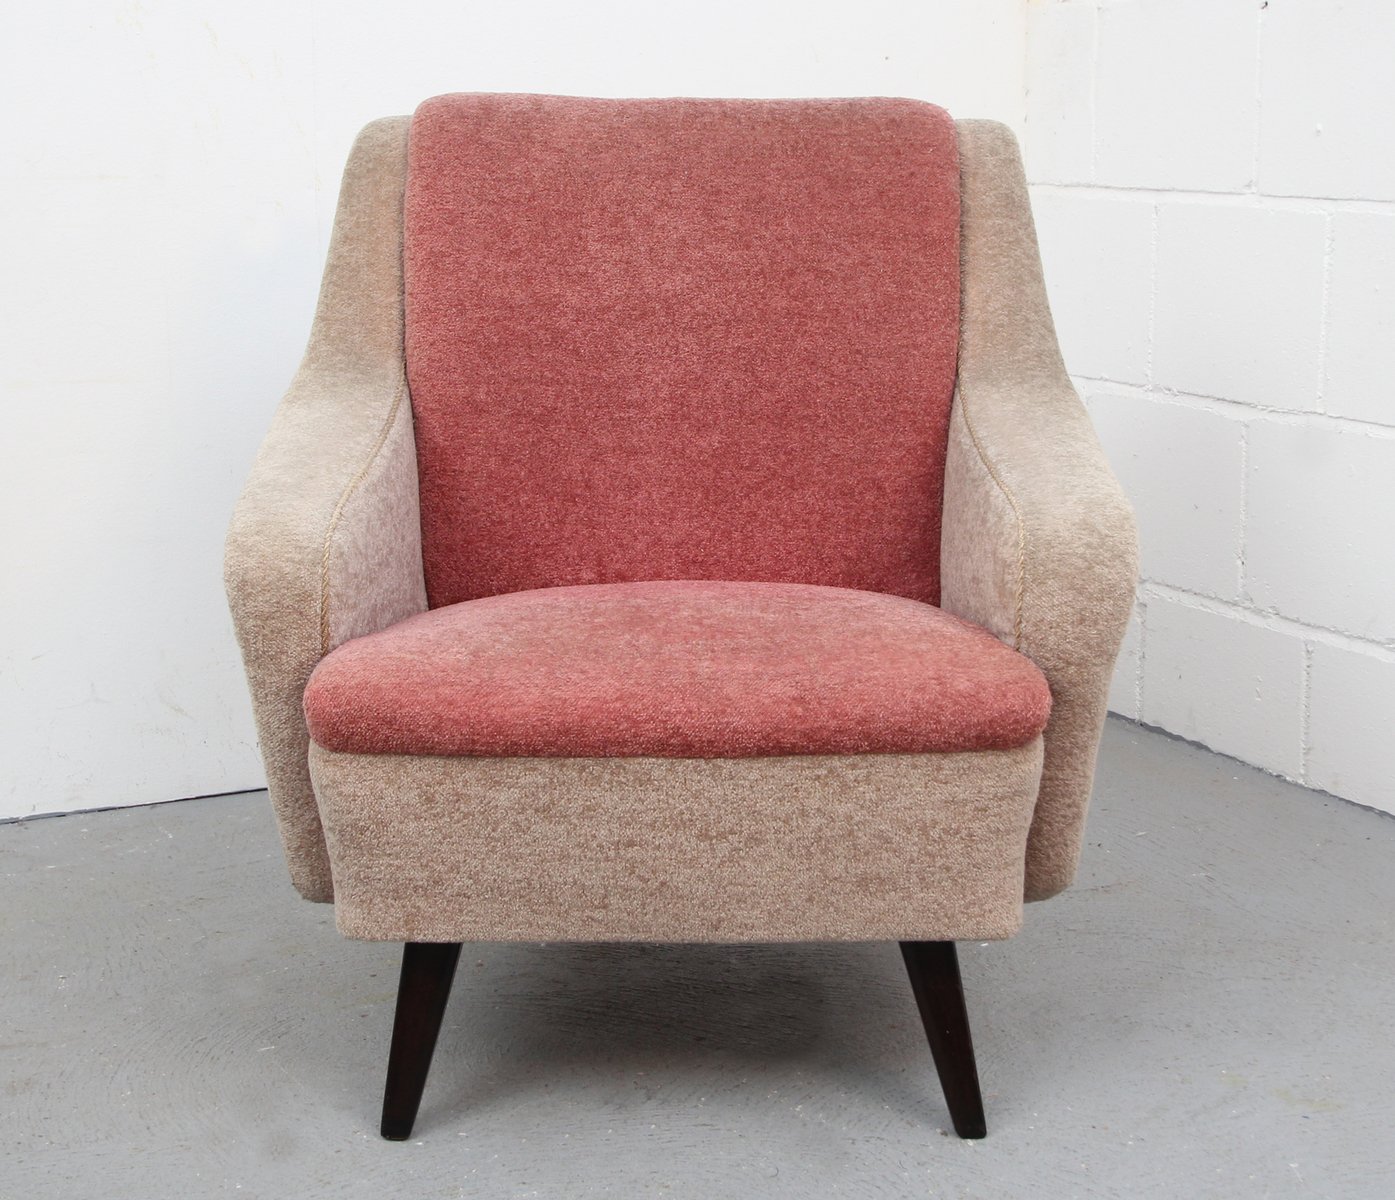 TwoTone German Pink Armchair, 1950s for sale at Pamono